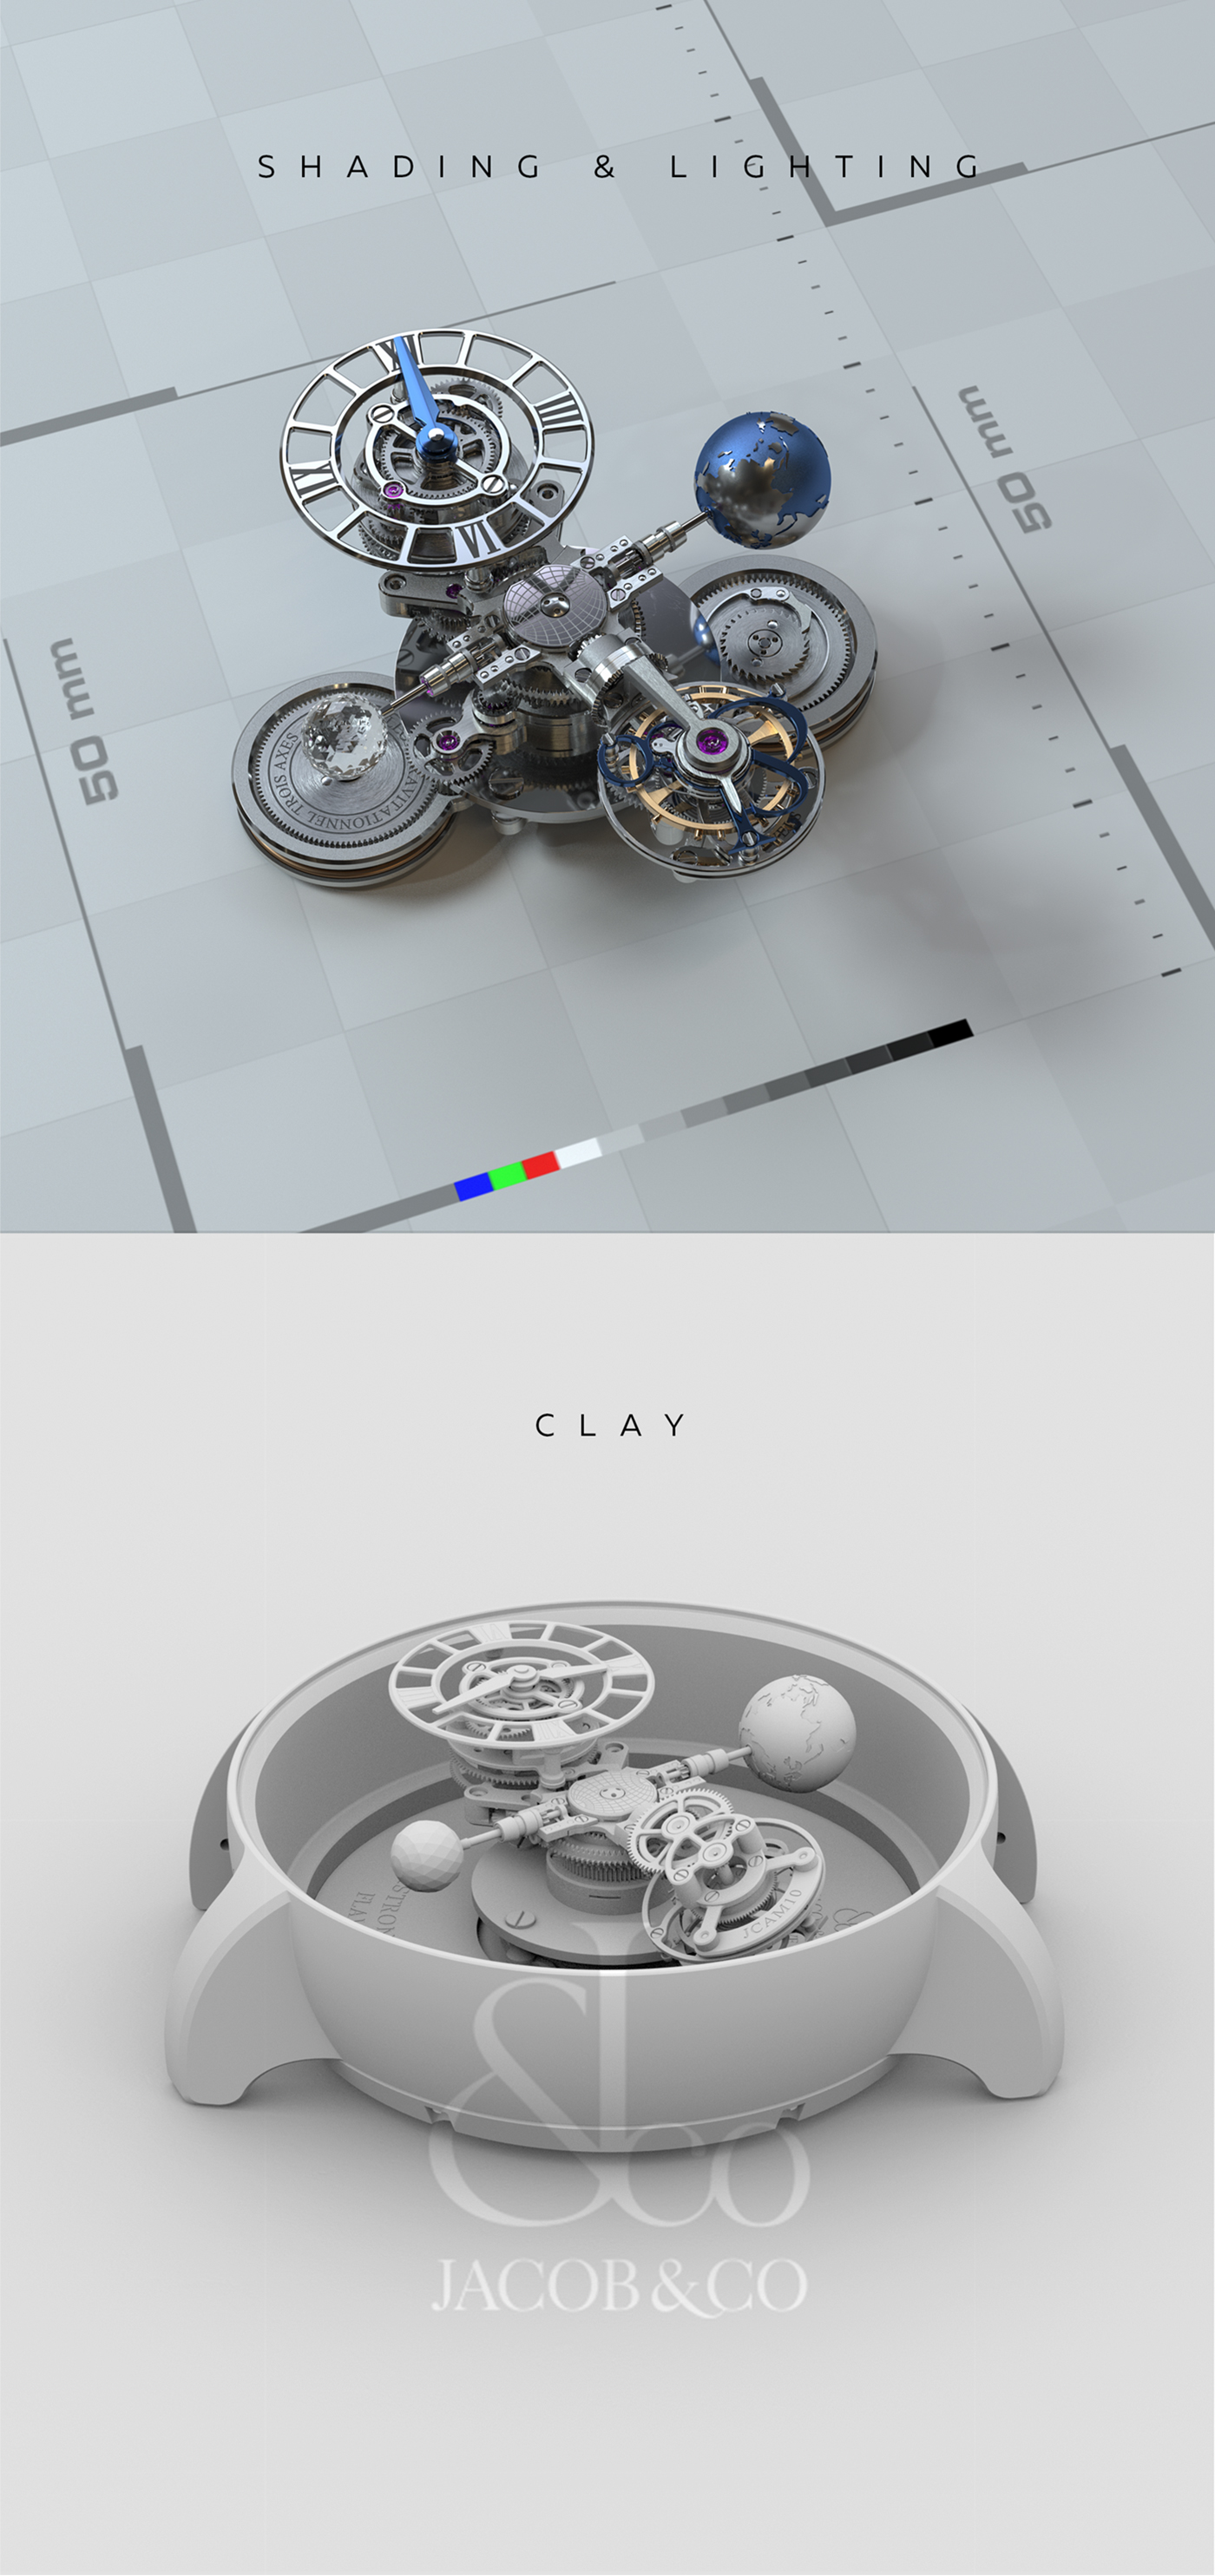 timepieces watch render shading lighting Render astronomia creatorzdeitz 3D Visualization cad modeling swiss made